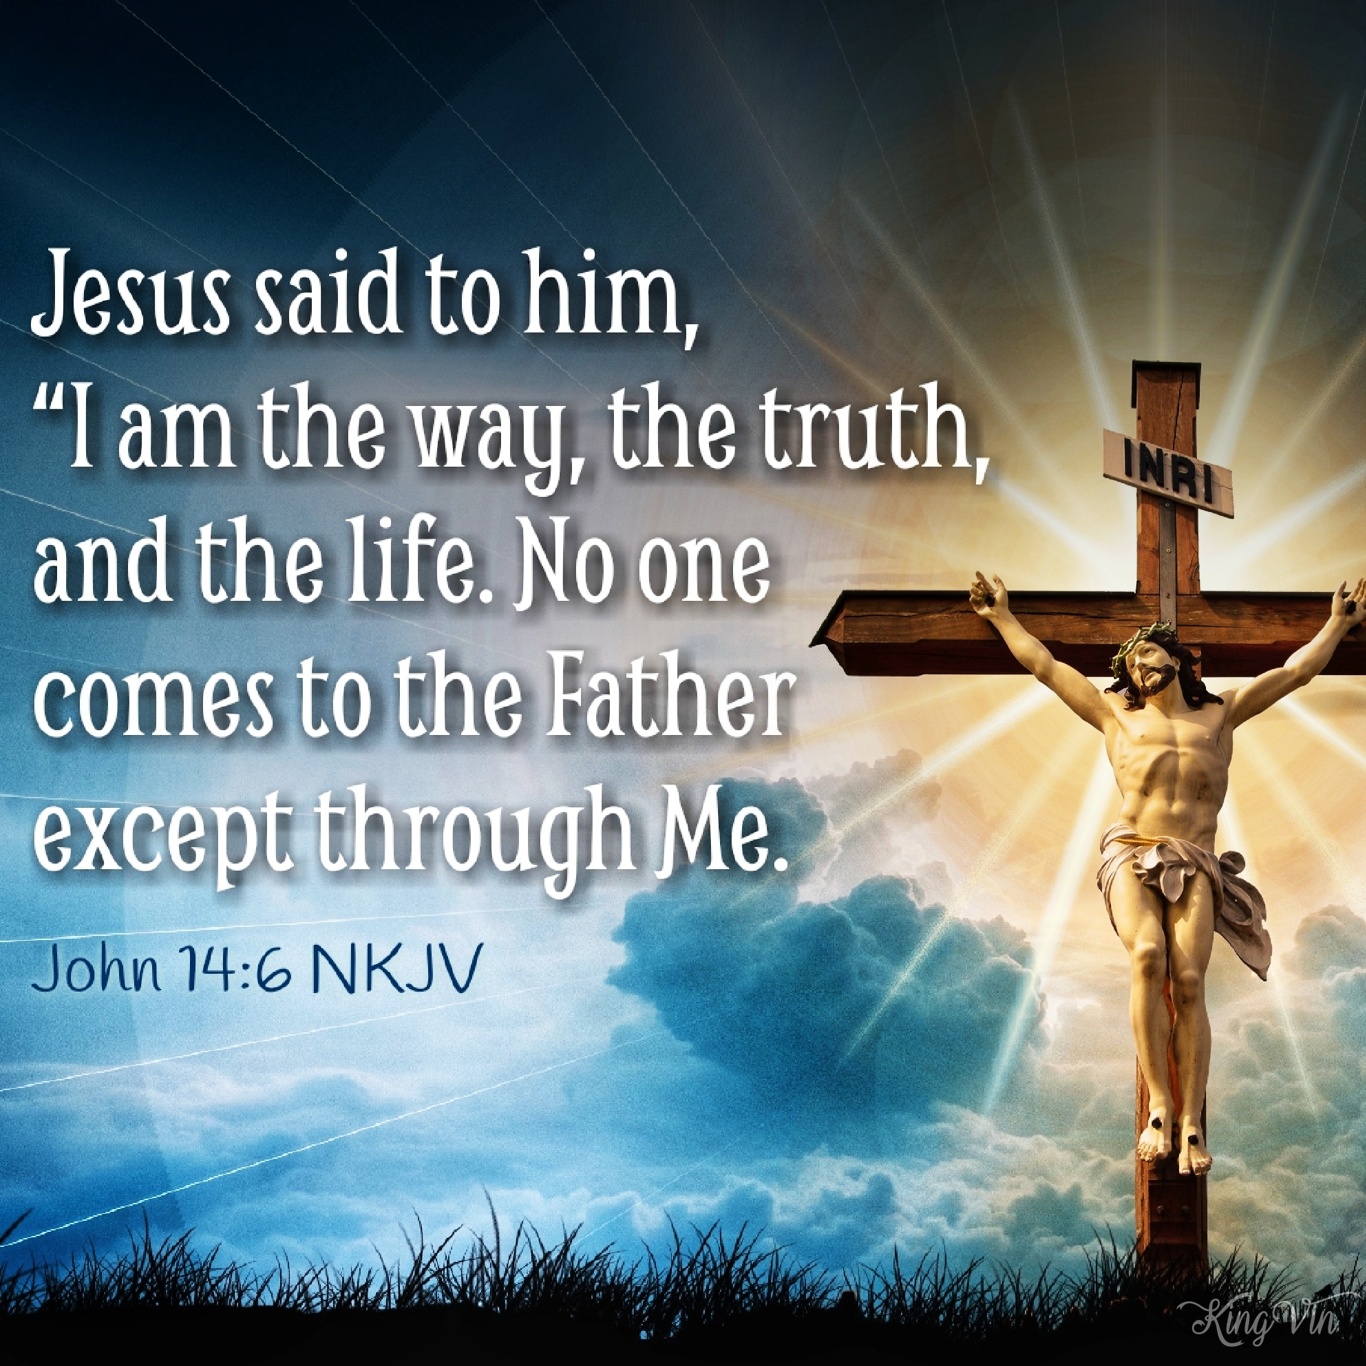 Jesus said to him, “I am the way, the truth, and the life. No one comes to the Father except through Me. John 14:6 NKJV